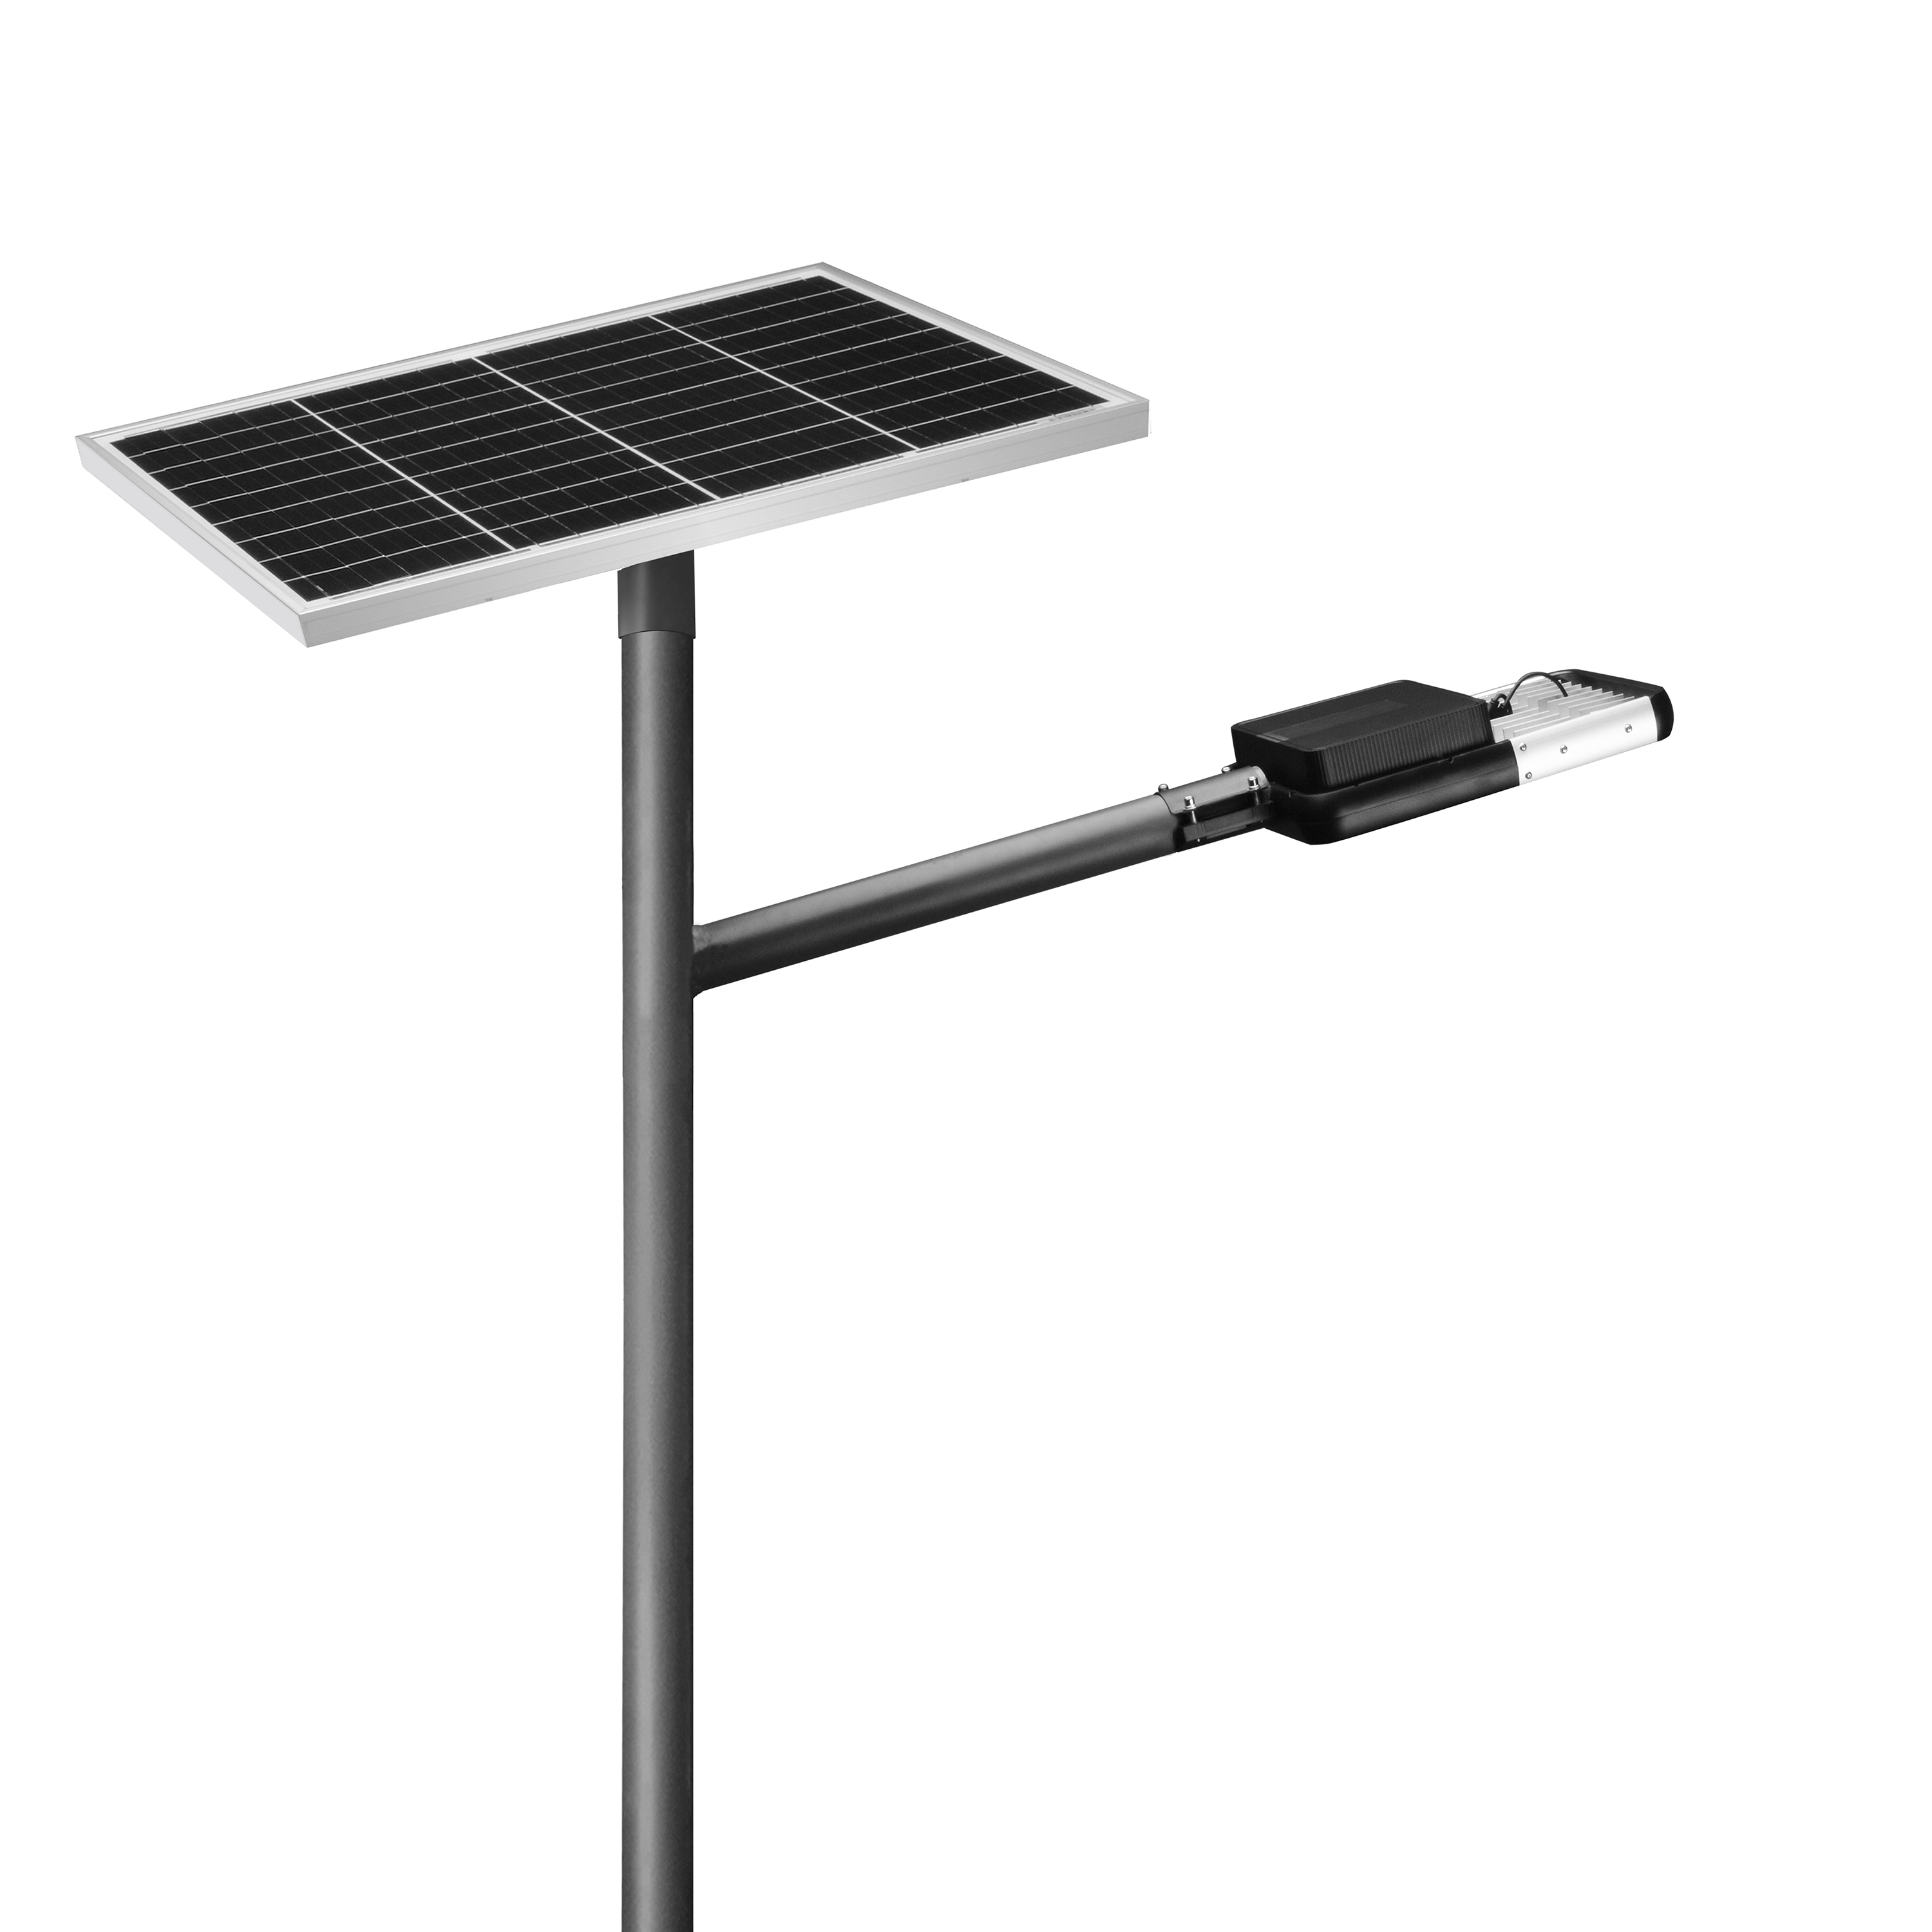 30W New Generation Integrated All in One Solar Street LED Street Light with IEC/TUV/RoHS/CE Certificate with Remote Control